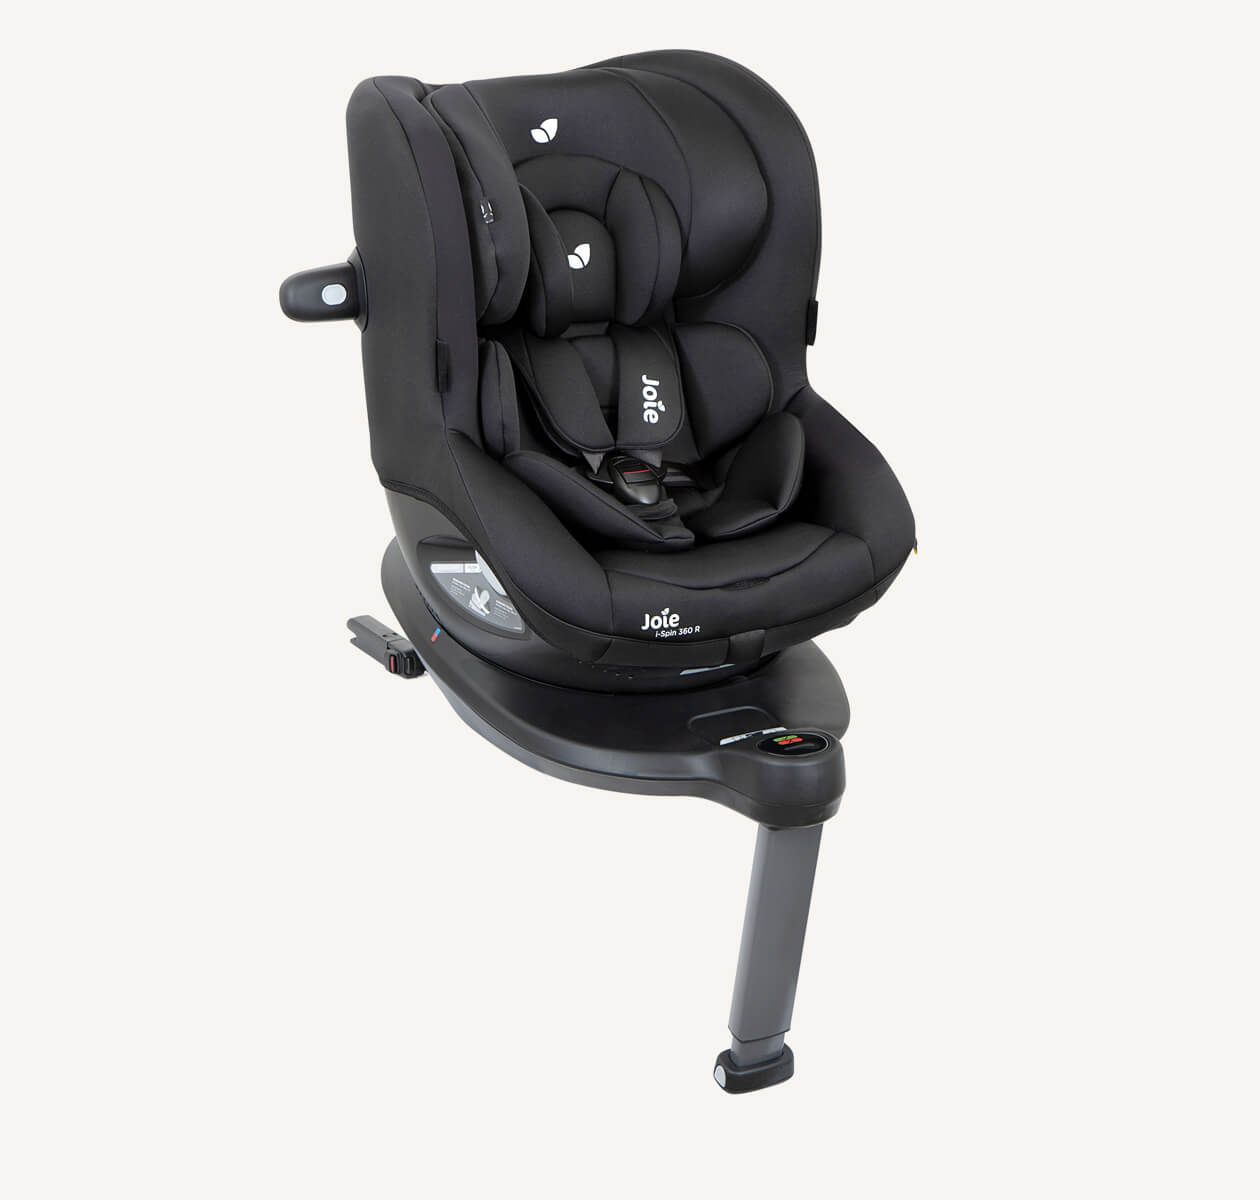  Joie I-Spin 360 R spinning car seat in black at an angle.